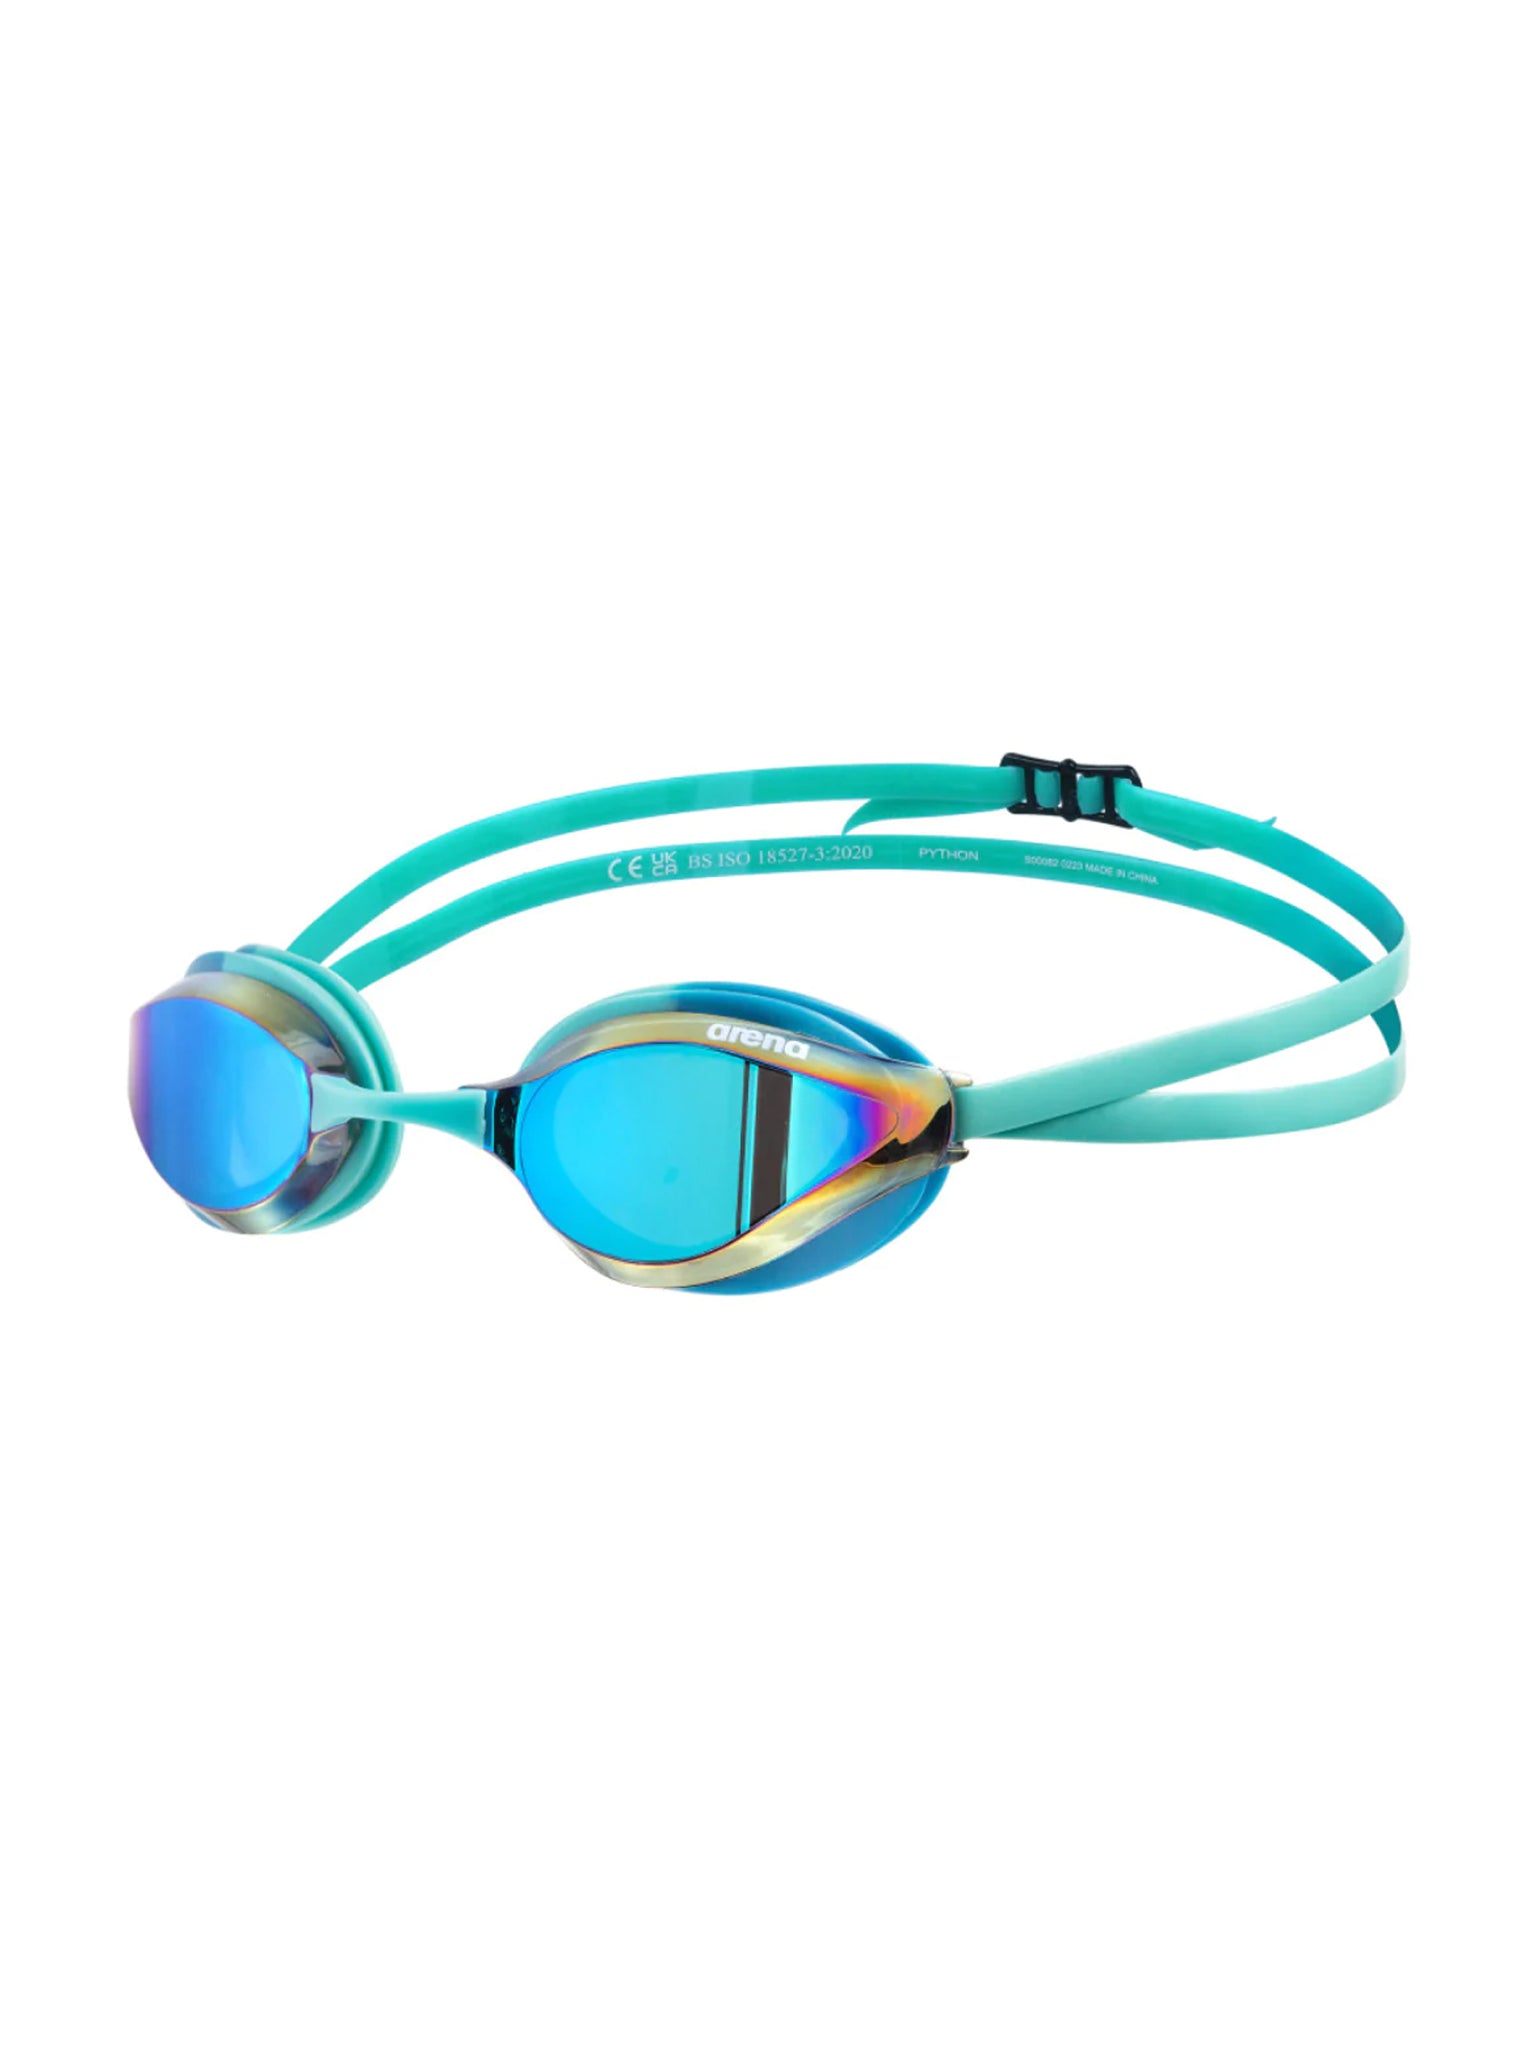 The One Python Mirror Swim goggle - Turquoise/Water/Blue Cosmo